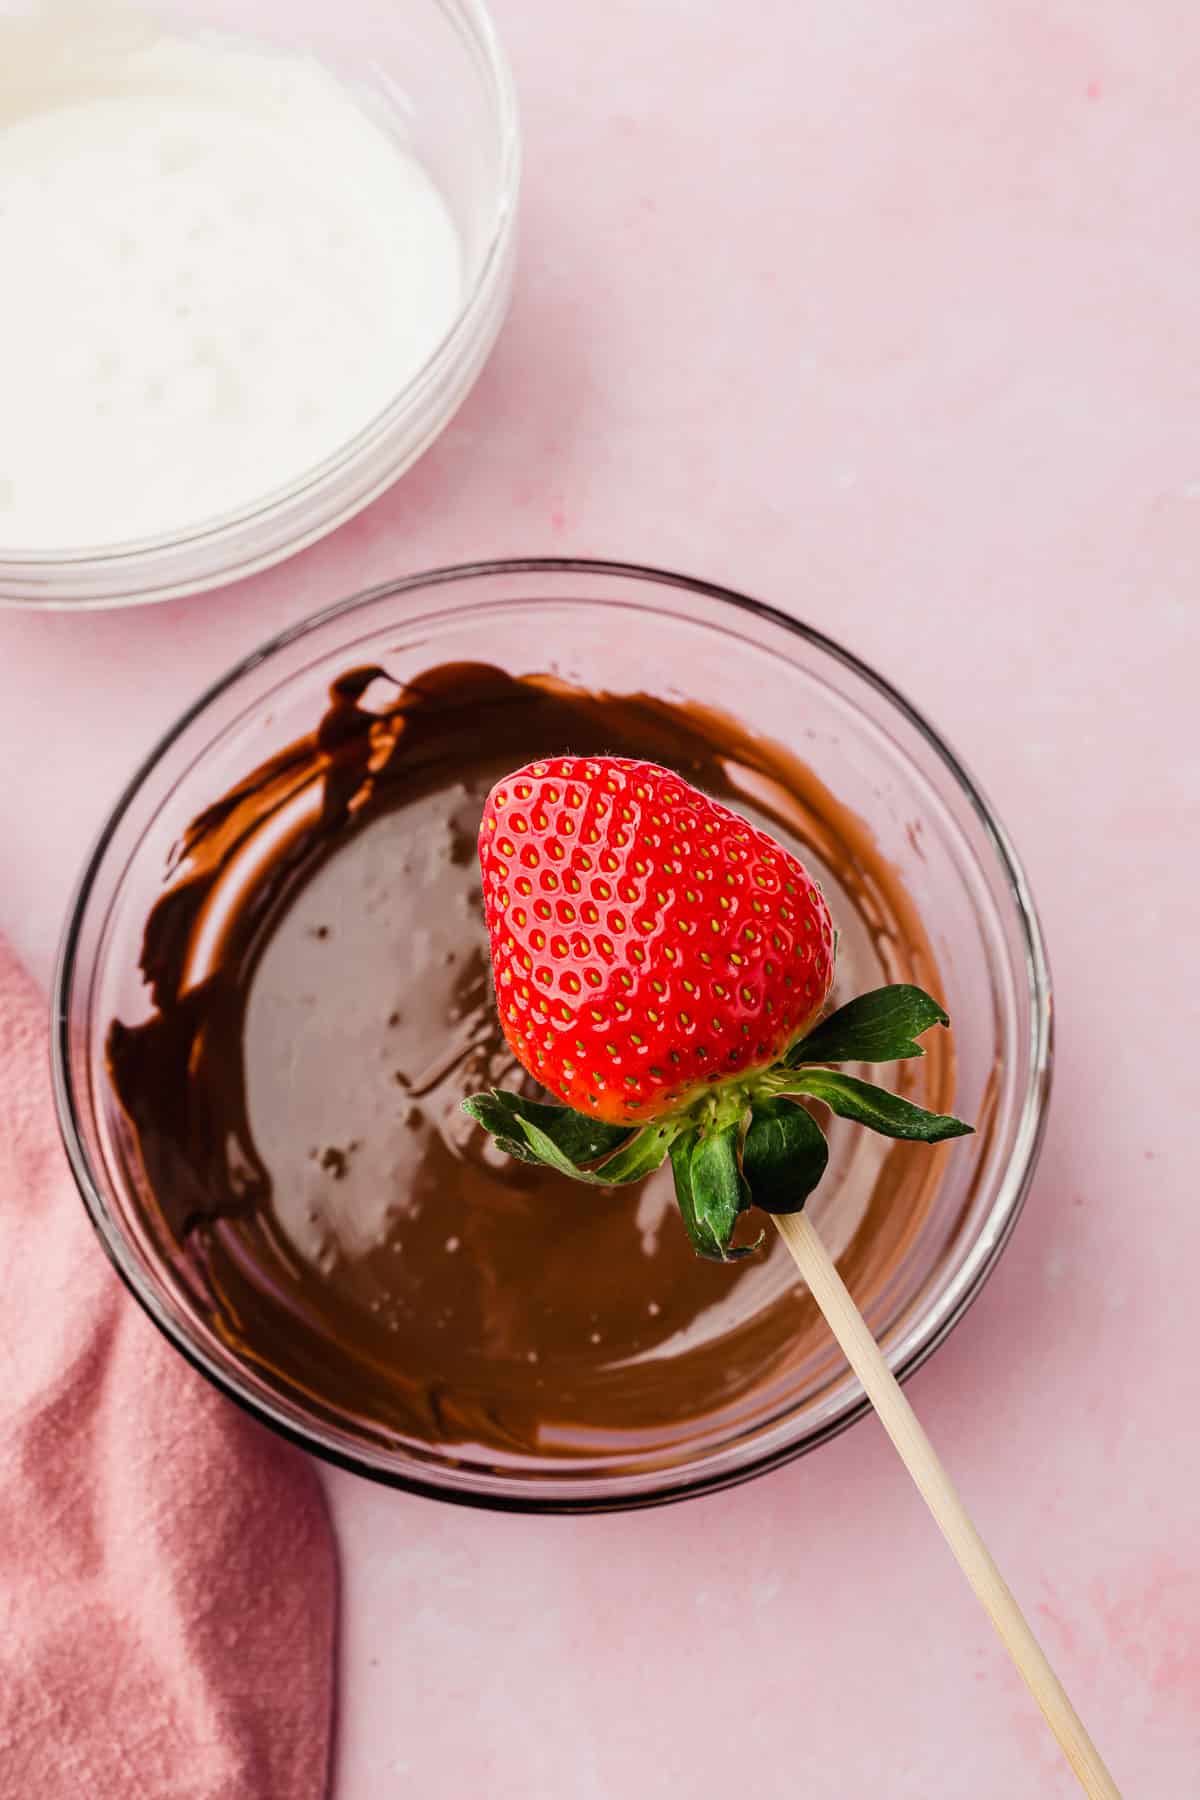 A fresh strawberry on a wooden skewer being held over a bowl of melted dark chocolate before dipping.